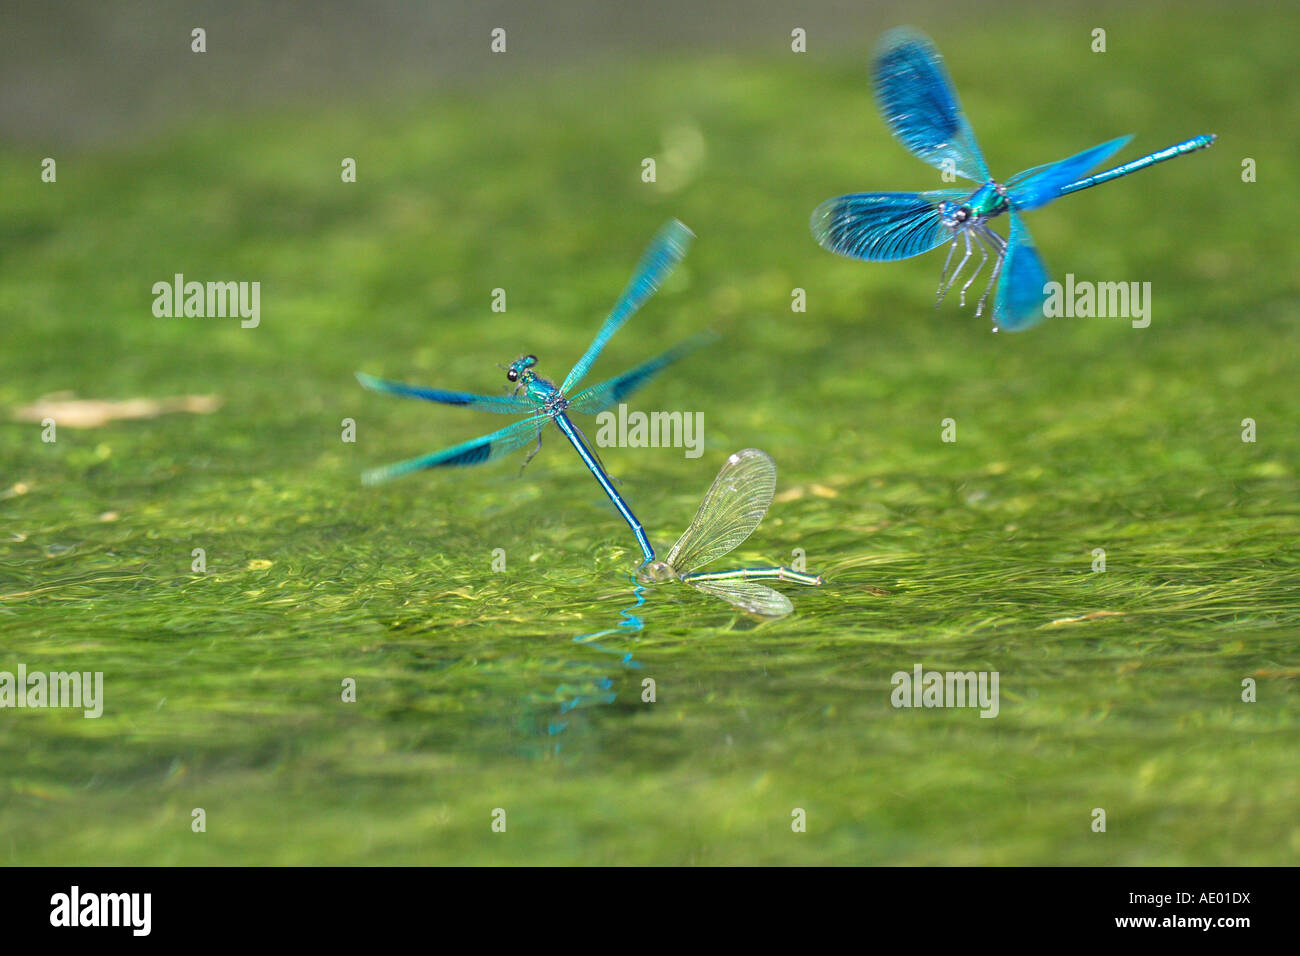 banded blackwings, banded agrion, banded demoiselle (Calopteryx splendens, Agrion splendens), male attacking couple laying eggs Stock Photo